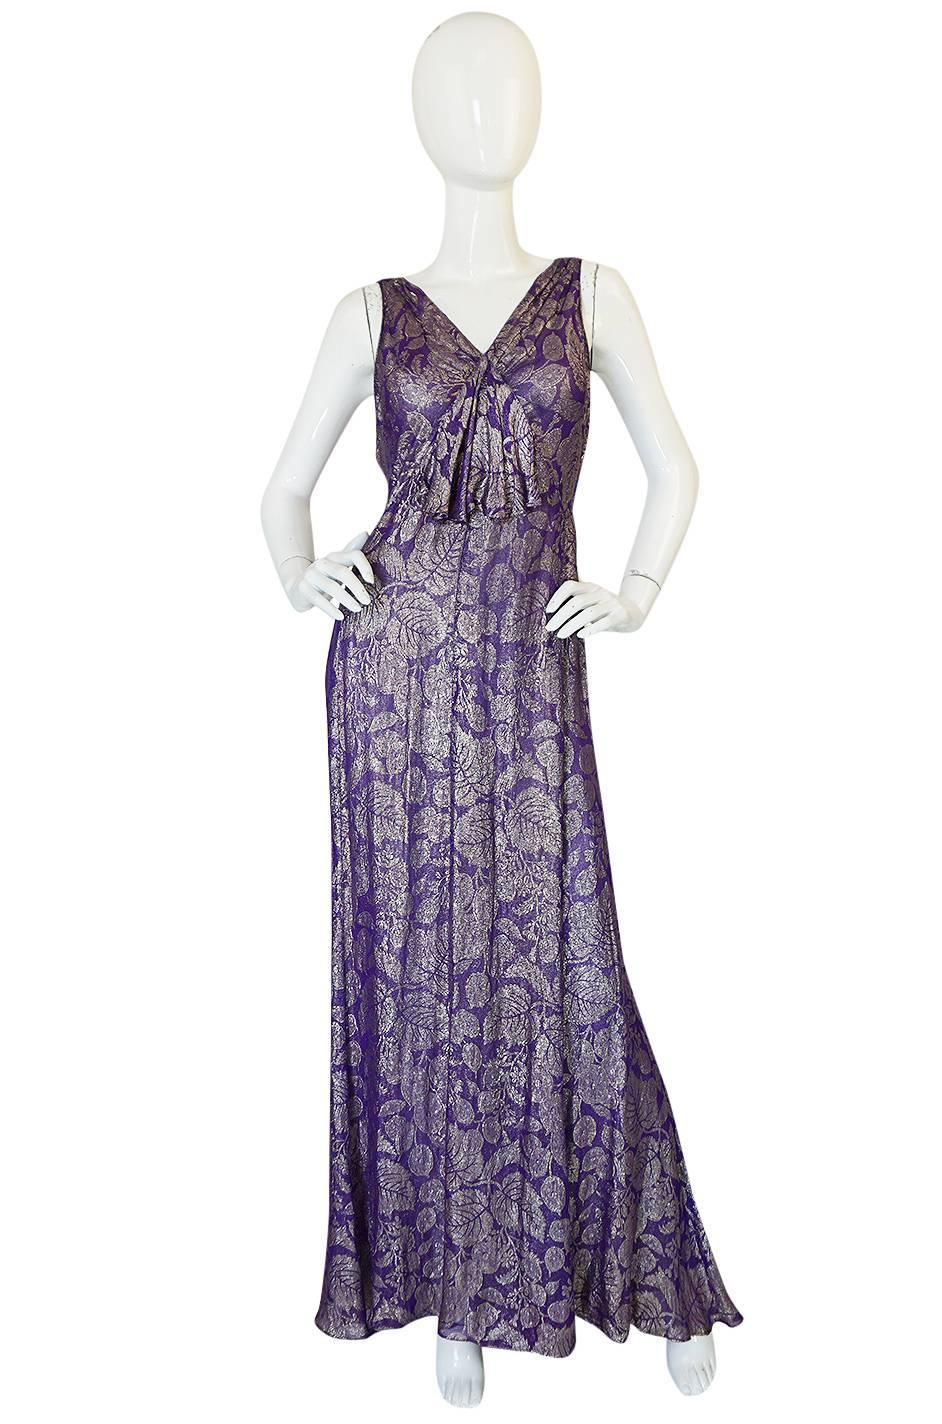 

This extraordinary and exquisite, late 1920s, early 30s bias cut gown is made from a spectacular mix of real metallic gold and purple thread. It is truly a masterpiece and really a work of art. It is one of the most spectacular gowns from this